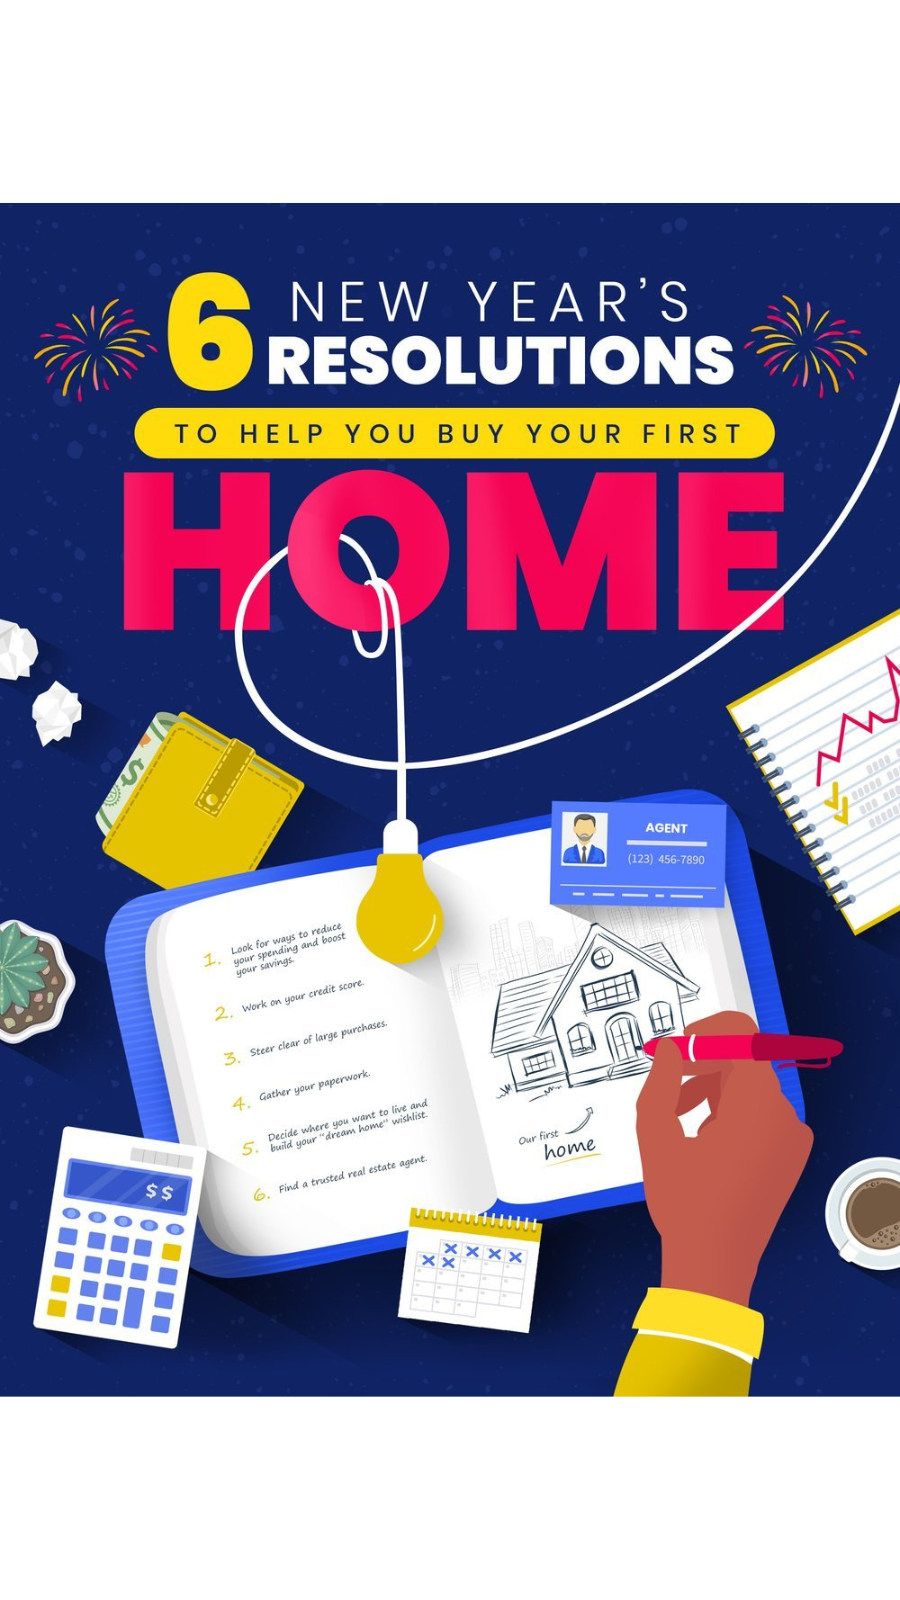 ear's Resolutions To Help You Buy Your First Silicone Valley Home